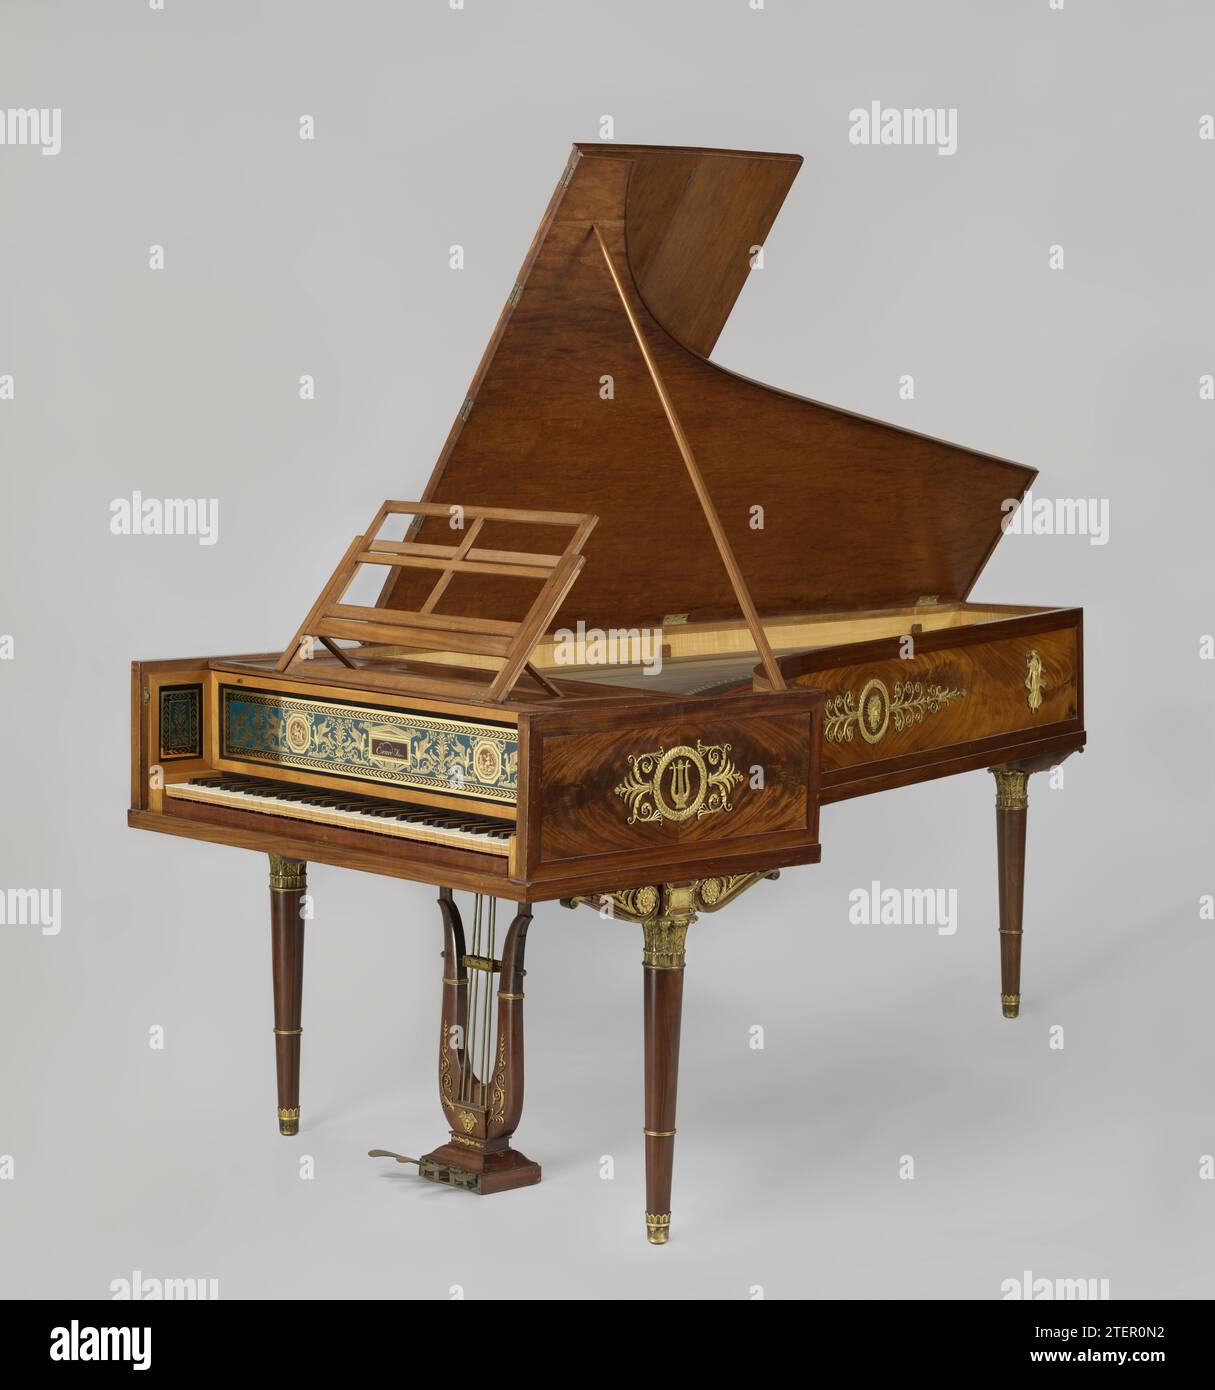 Pianoforte, Erard Frères, 1808 Wing piano in Empirestyle, made of mahogany with gold -plated bronze and a winch -shaped voice in the pedals. musical instrument maker: Parispainter: France spruce (wood). mahogany (wood). ivory. ebony (wood). brass (alloy). glass. bronze (metal). gilding (material) gilding Wing piano in Empirestyle, made of mahogany with gold -plated bronze and a winch -shaped voice in the pedals. musical instrument maker: Parispainter: France spruce (wood). mahogany (wood). ivory. ebony (wood). brass (alloy). glass. bronze (metal). gilding (material) gilding Stock Photo